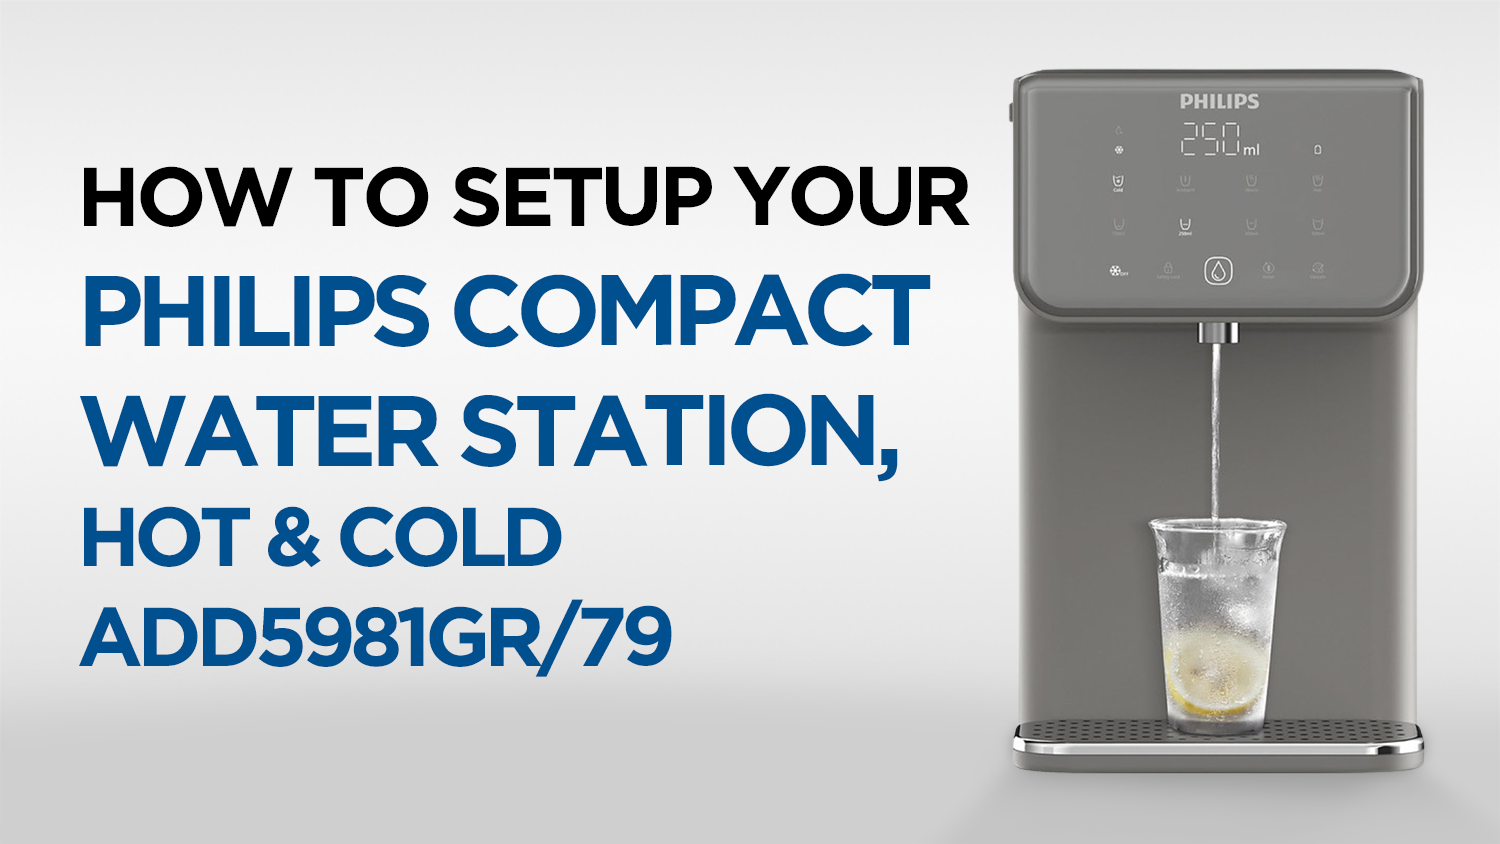 How to Set Up Your Philips Compact Water Station, Hot & Cold ADD5981GR/79